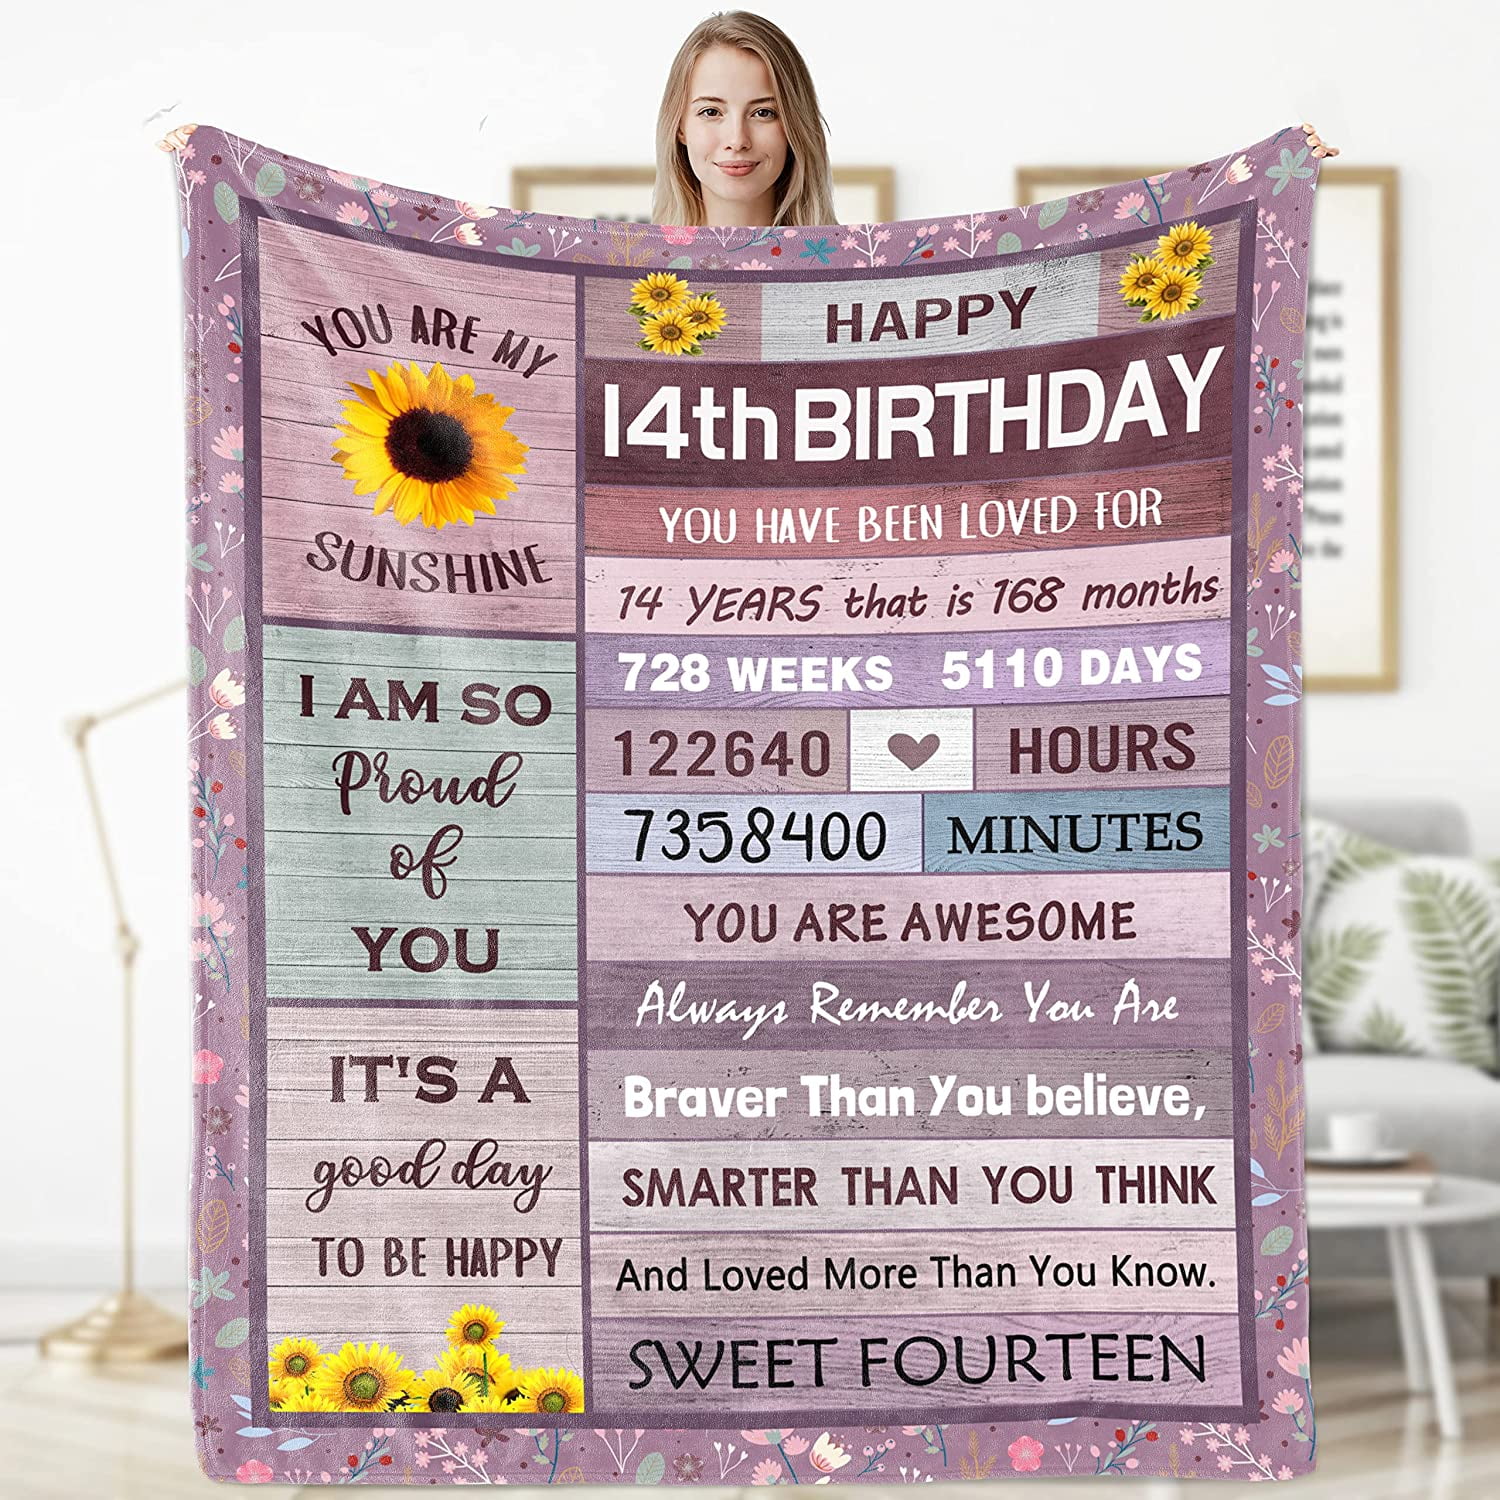 14 Year Old Gifts: 30 Great Gift Ideas for 14th Birthdays